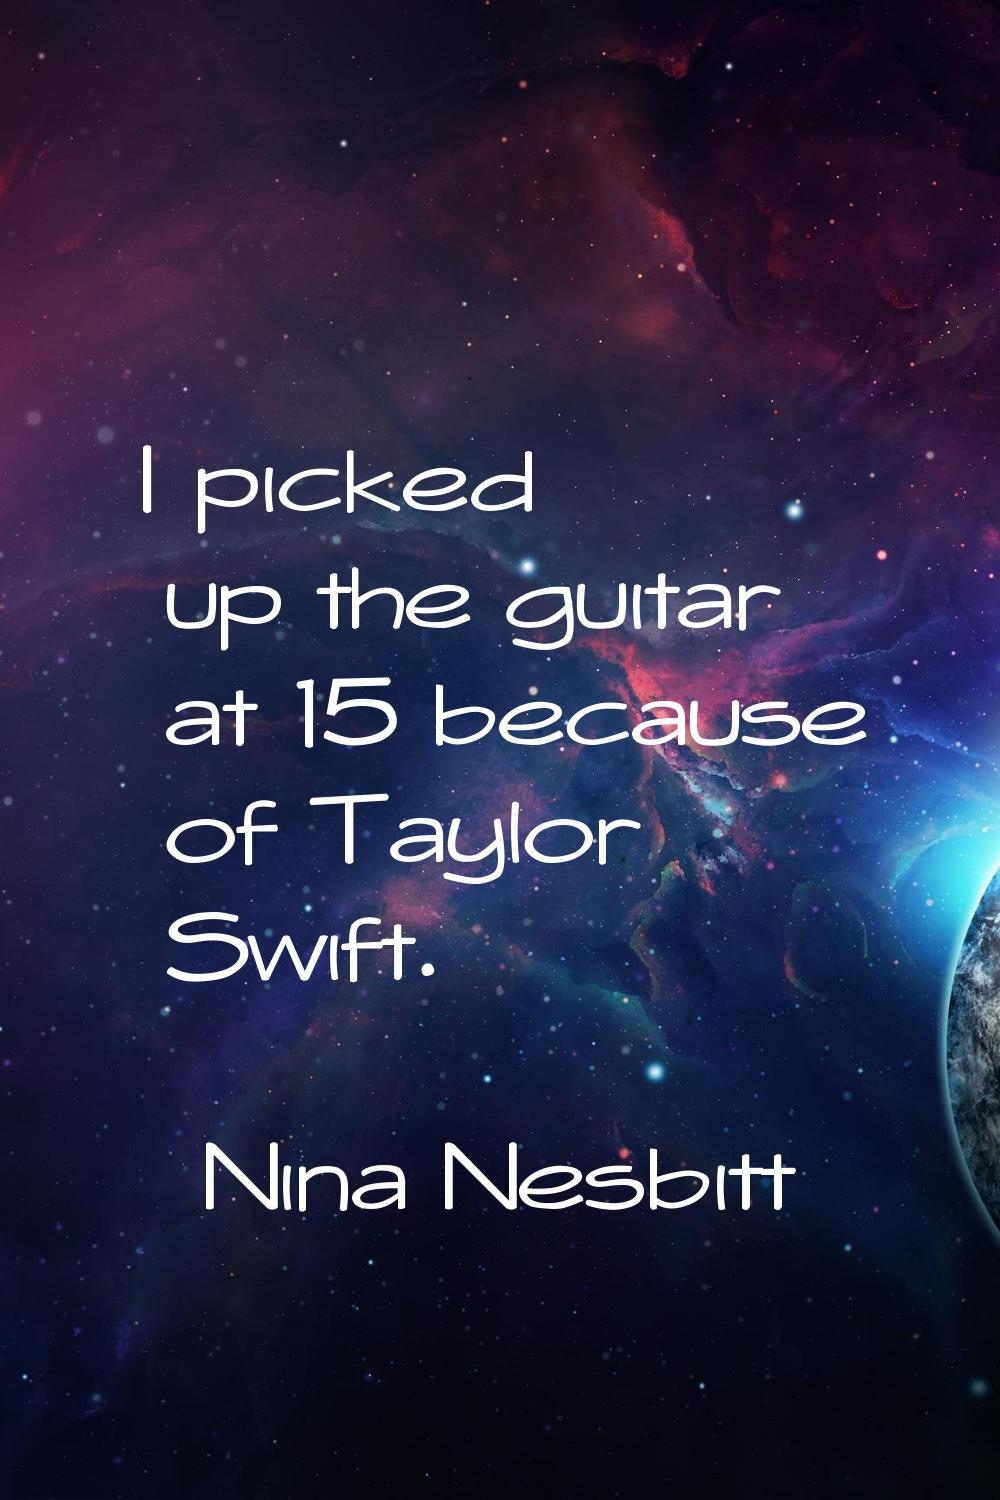 I picked up the guitar at 15 because of Taylor Swift.